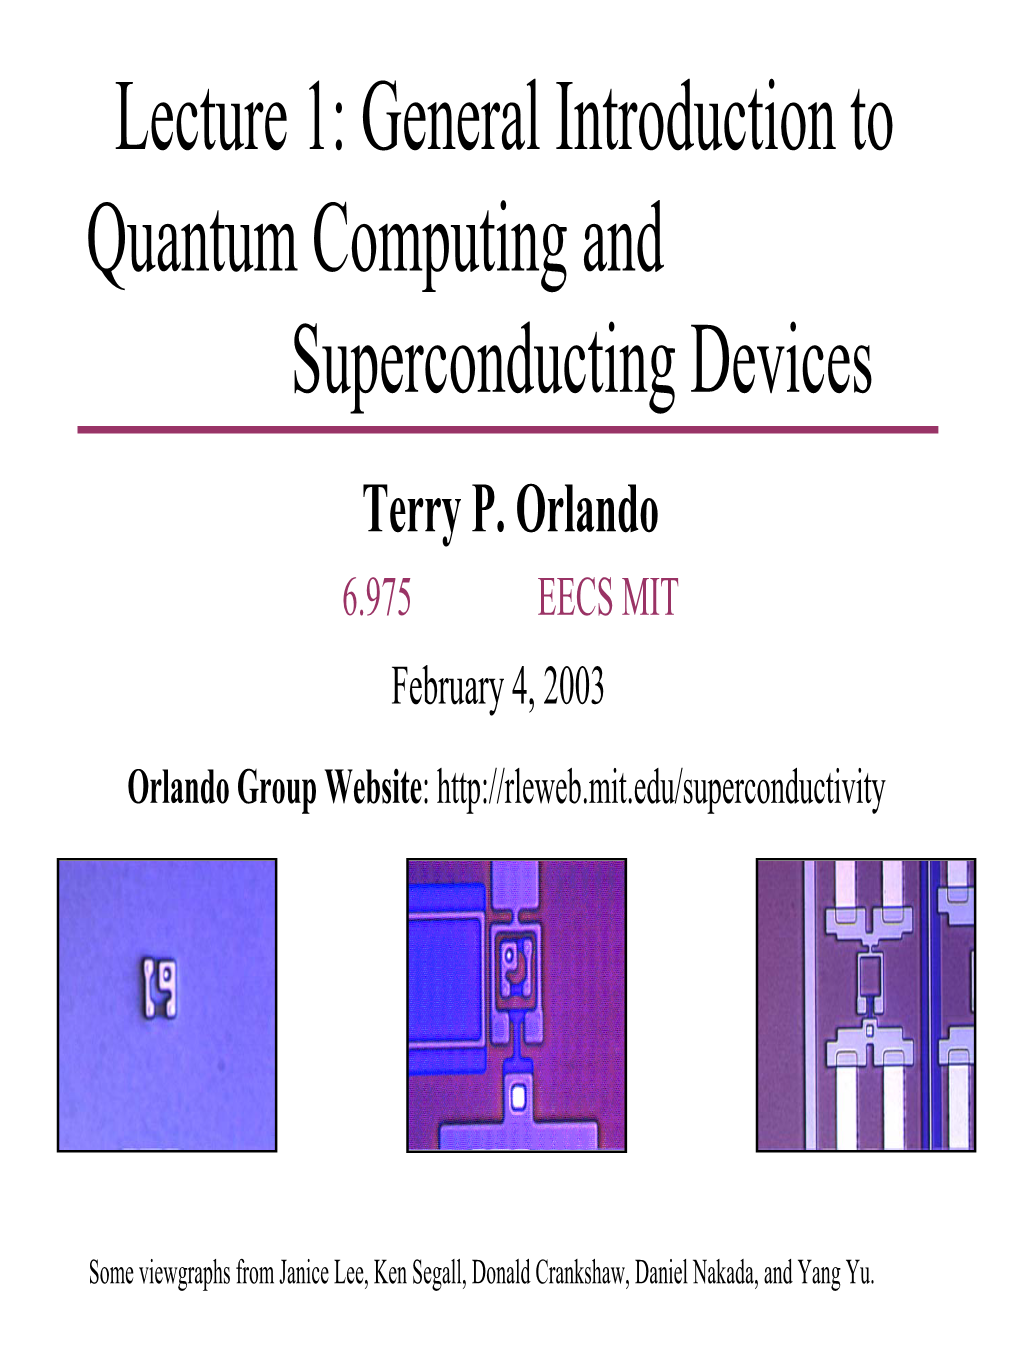 Quantum Computing with Superconducting Devices F.C